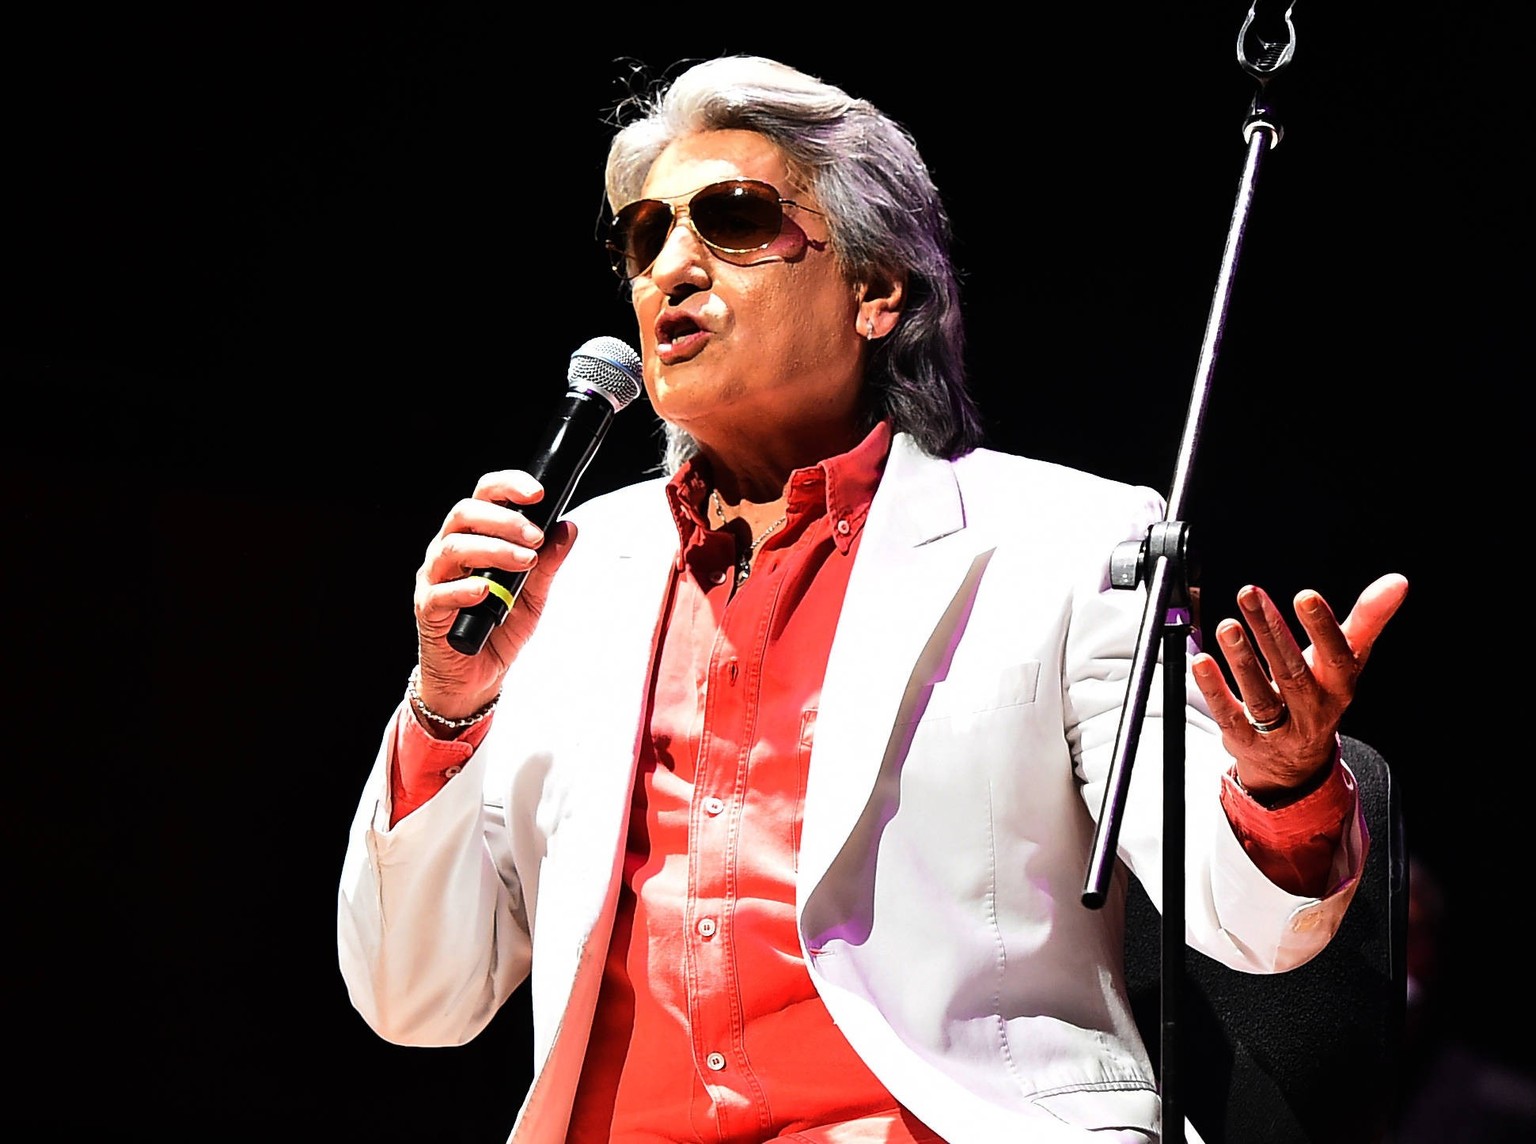 RECORD DATE NOT STATED FILE PHOTO - Singer Toto Cutugno at his concert in Izmir, Turkey, on 17 February 2017. Italian singer Toto Cutugno passed away at the age of 80. The singer was best known for hi ...